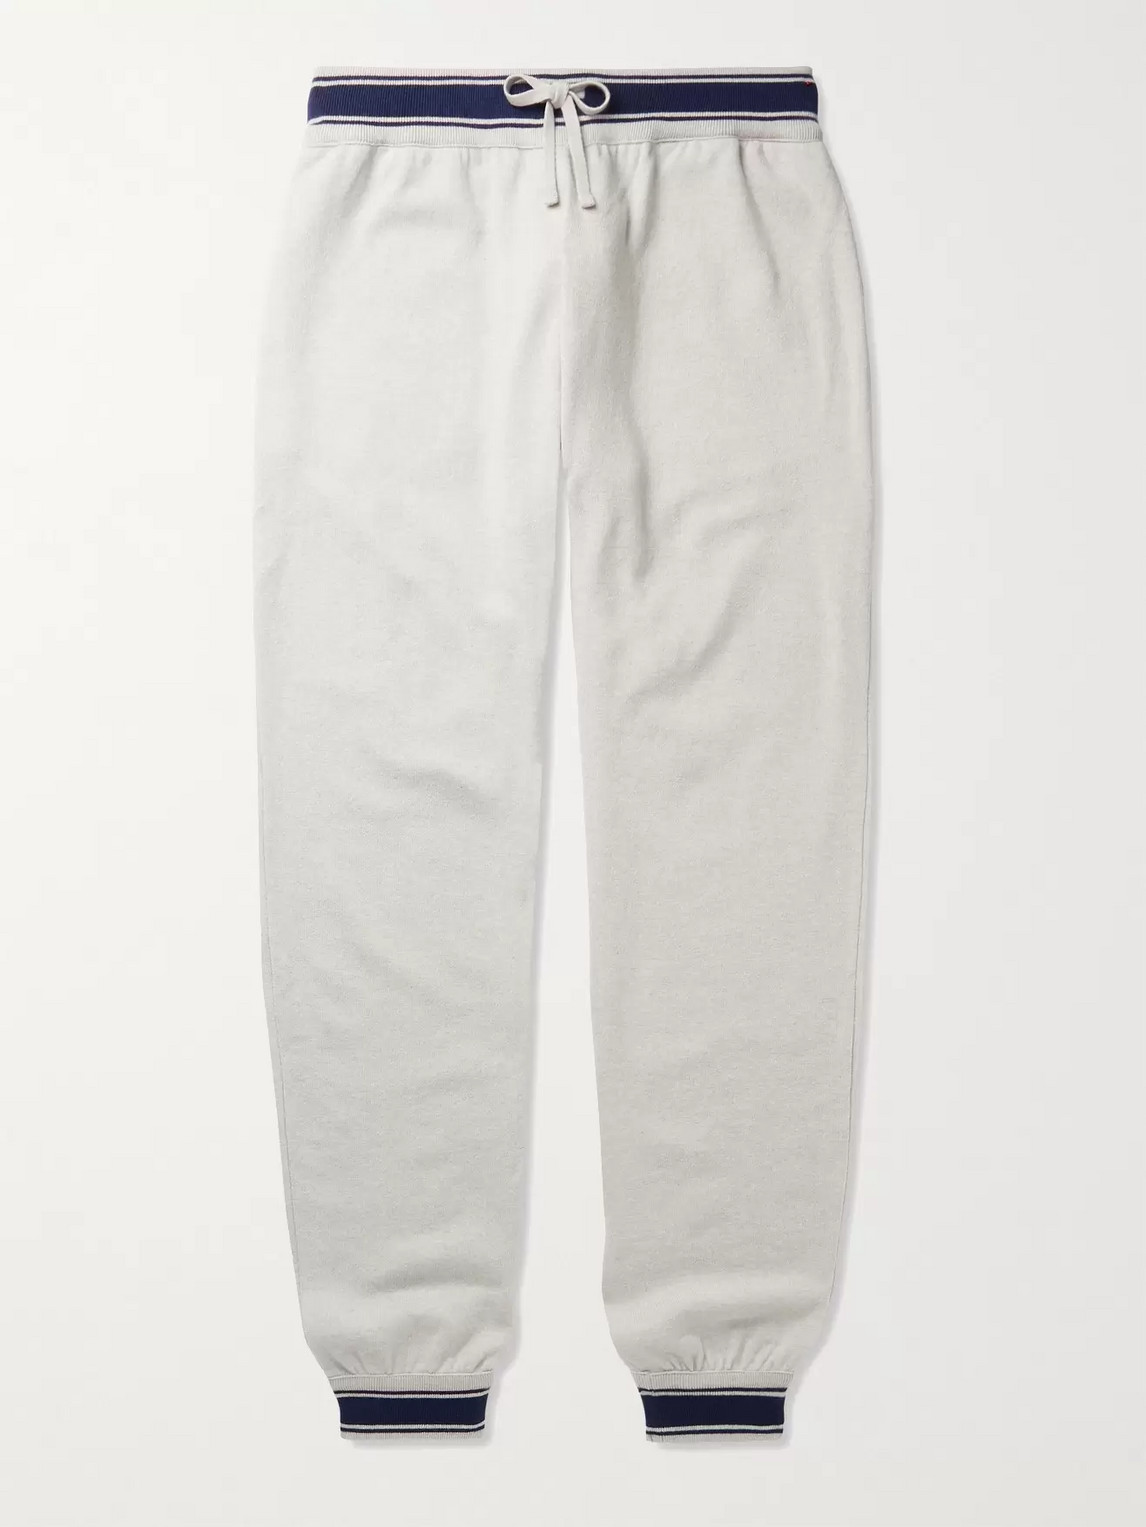 KITON TAPERED CONTRAST-TIPPED CASHMERE SWEATPANTS